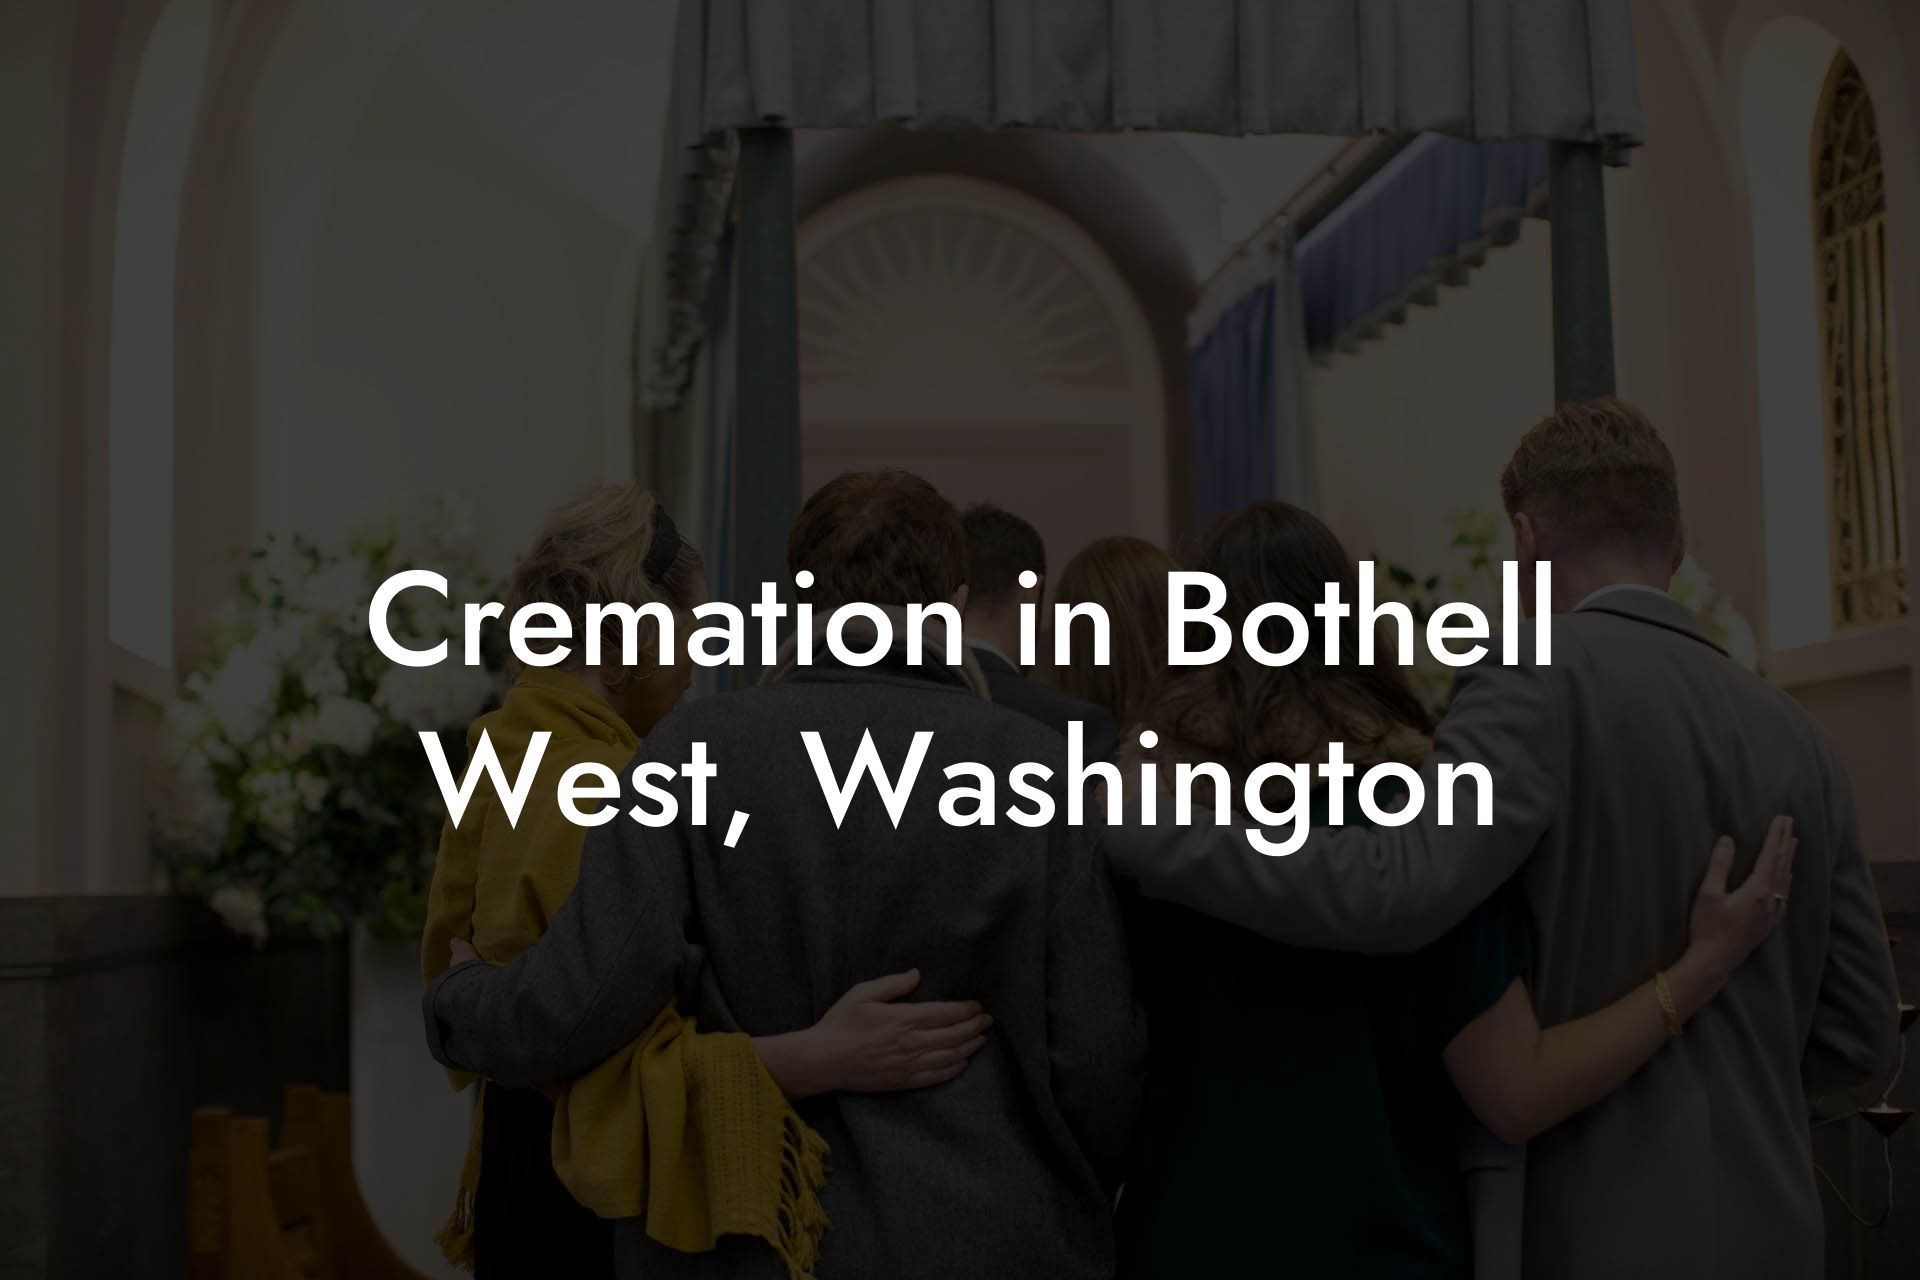 Cremation in Bothell West, Washington